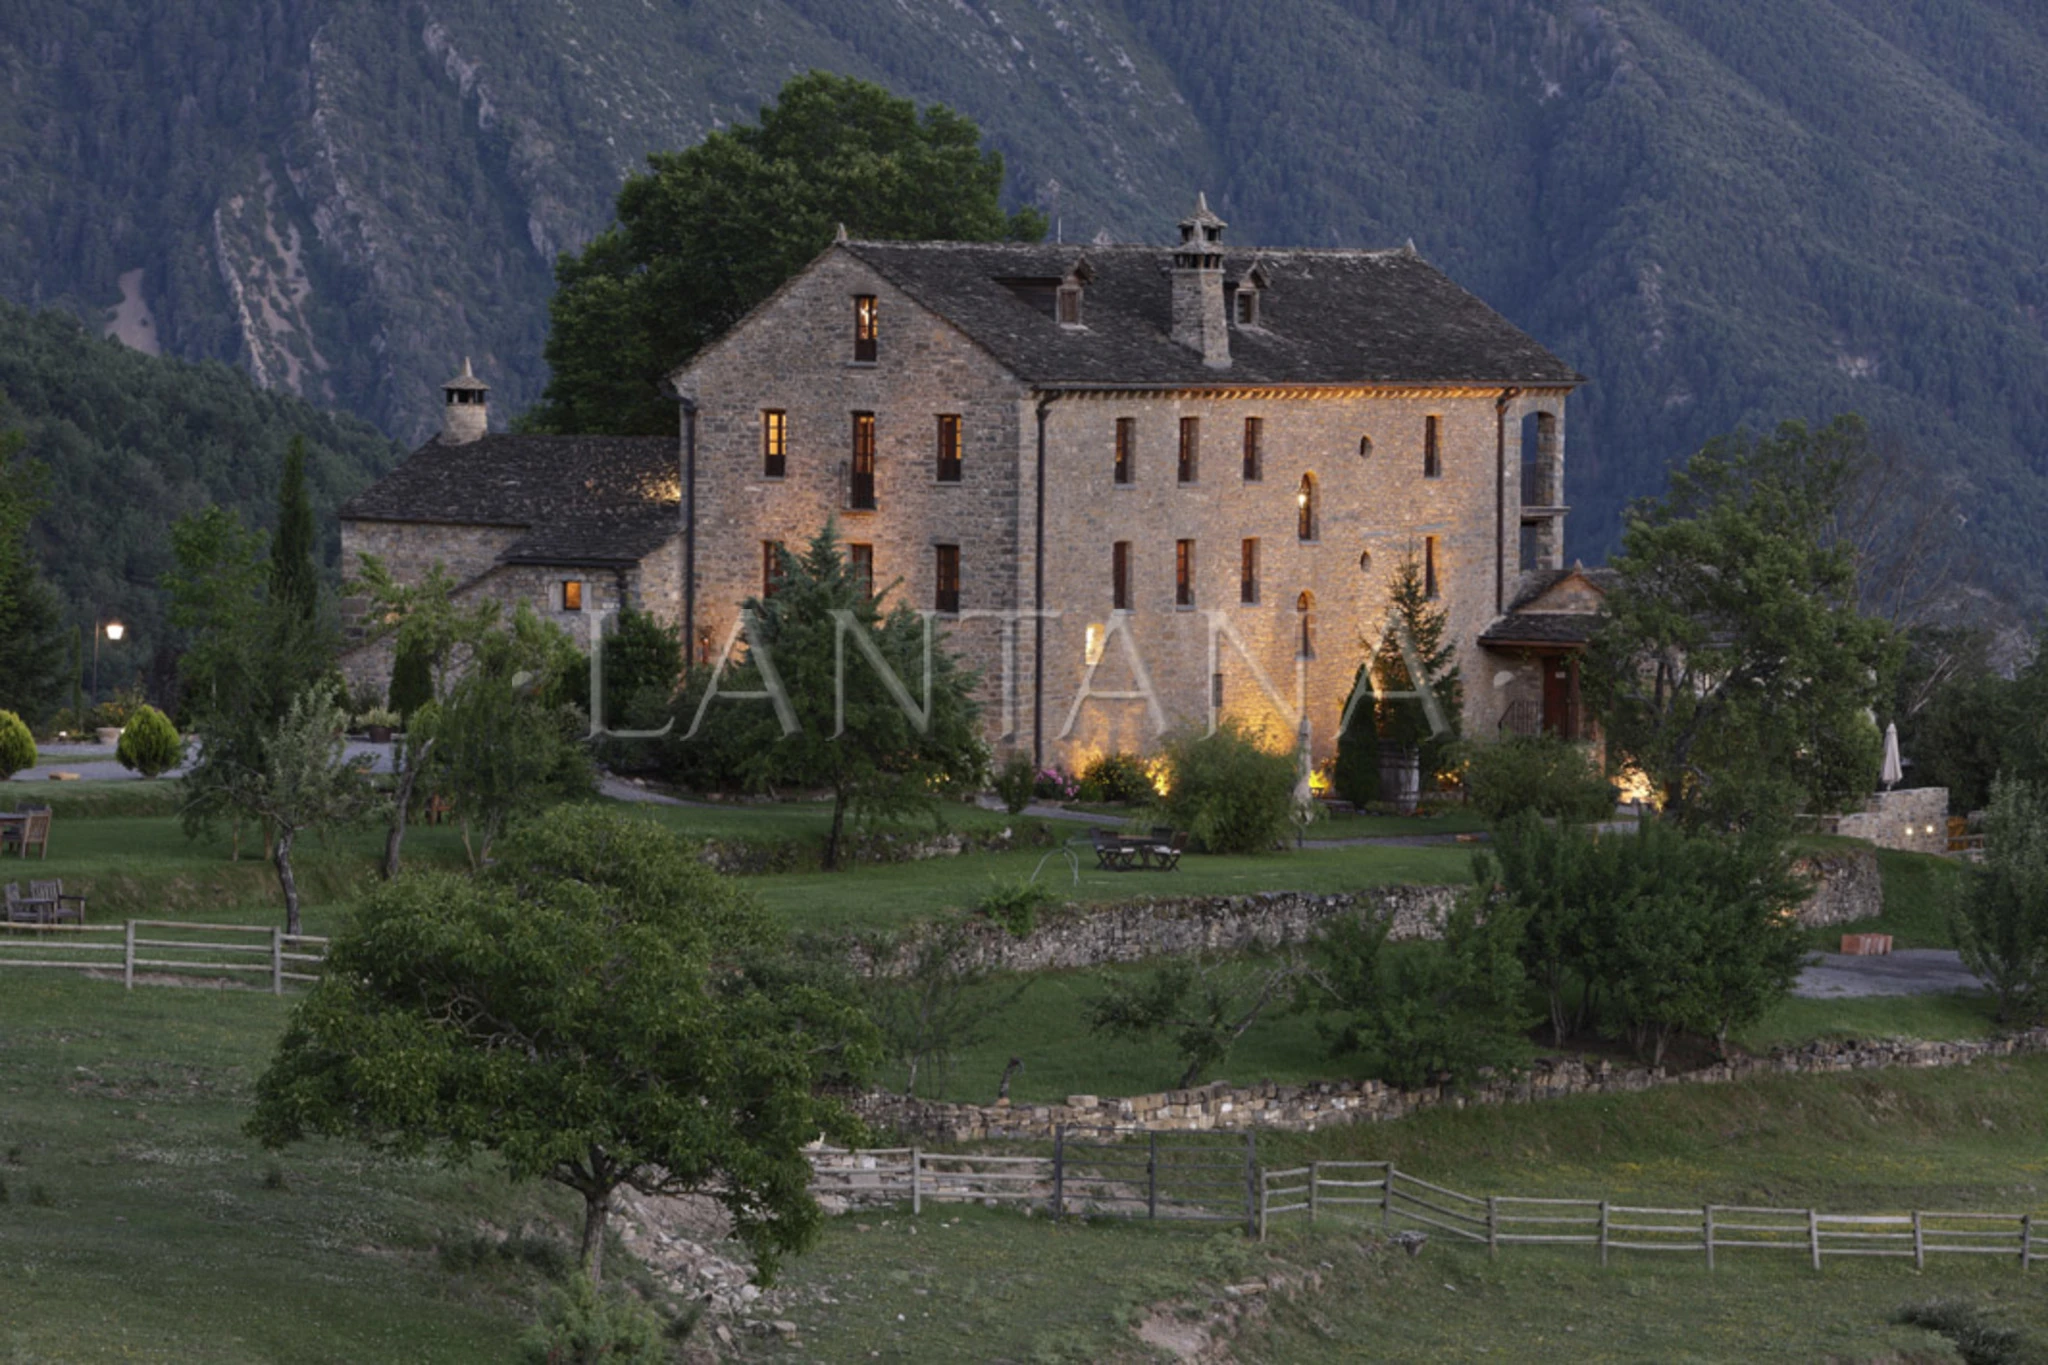 FANTASTIC ESTATE IN THE PYRENEES